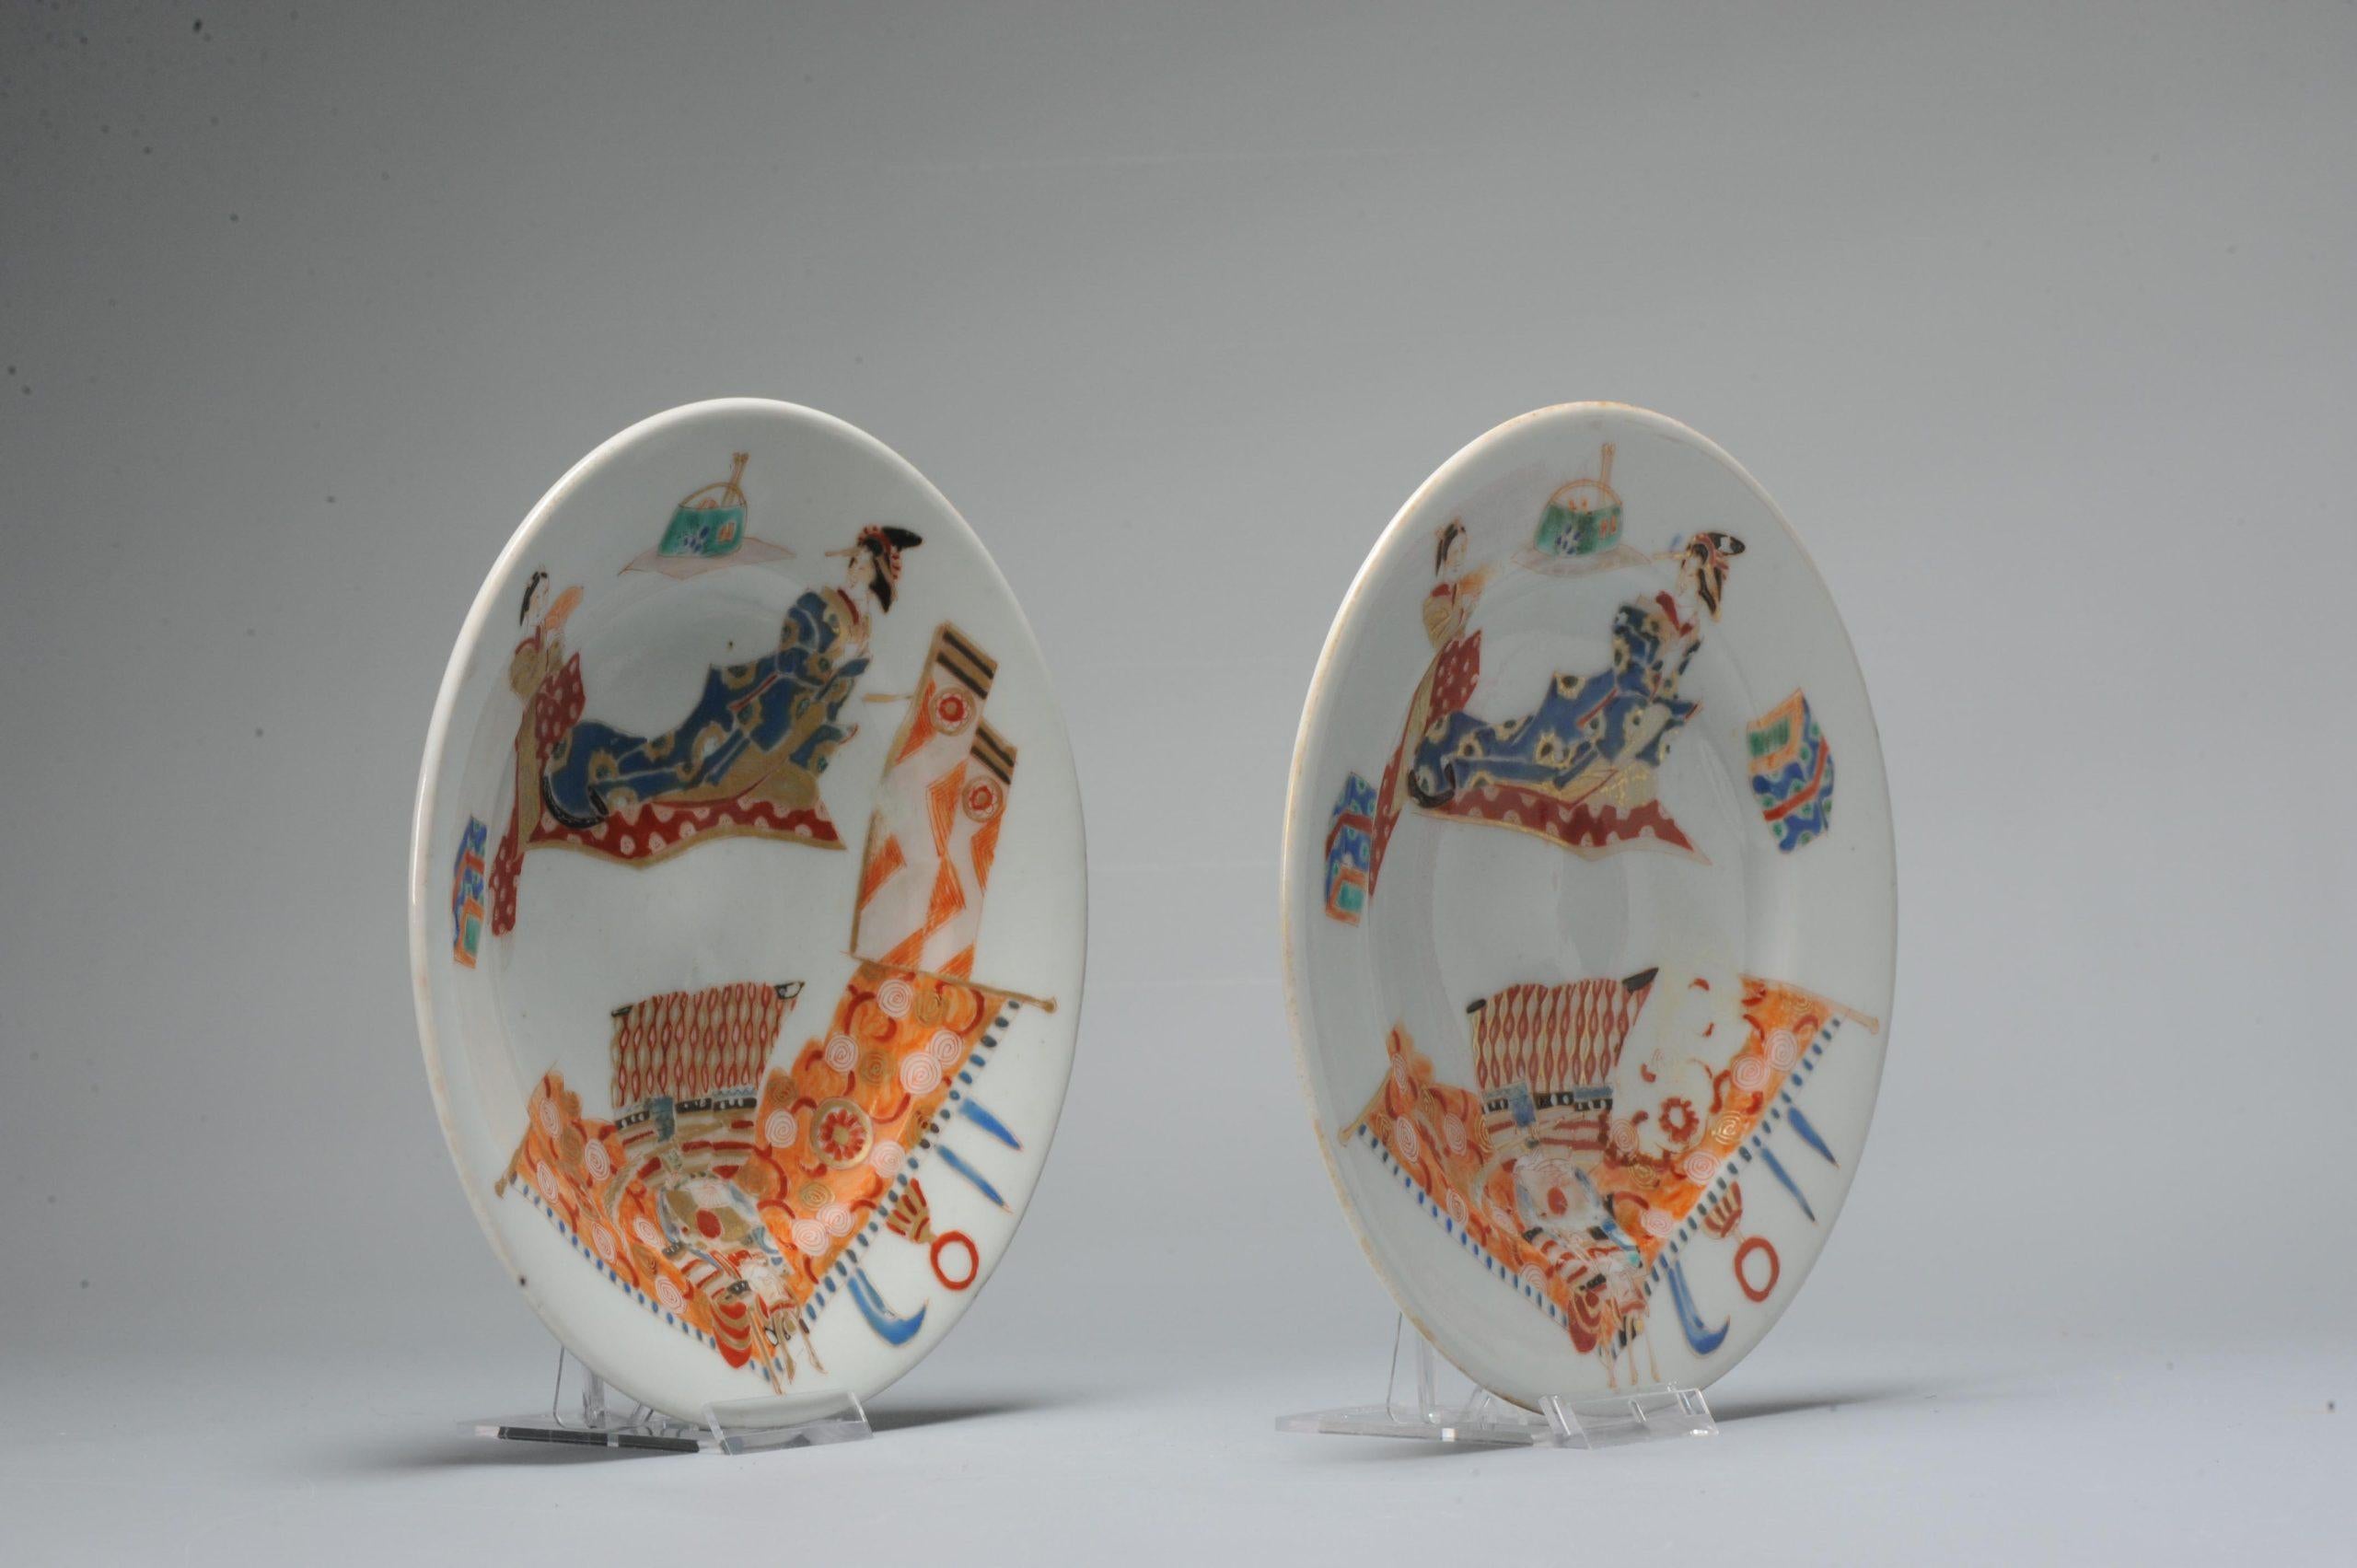 A lovely pair of Japanese porcelain plates.

Additional information:
Material: Porcelain & Pottery
Type: Plates
Japanese Style: Arita
Region of Origin: Japan
Period: 19th century
Age: Pre-1800
Condition: Perfect
Dimension: Ø 18.8 x 2.5 H cm
